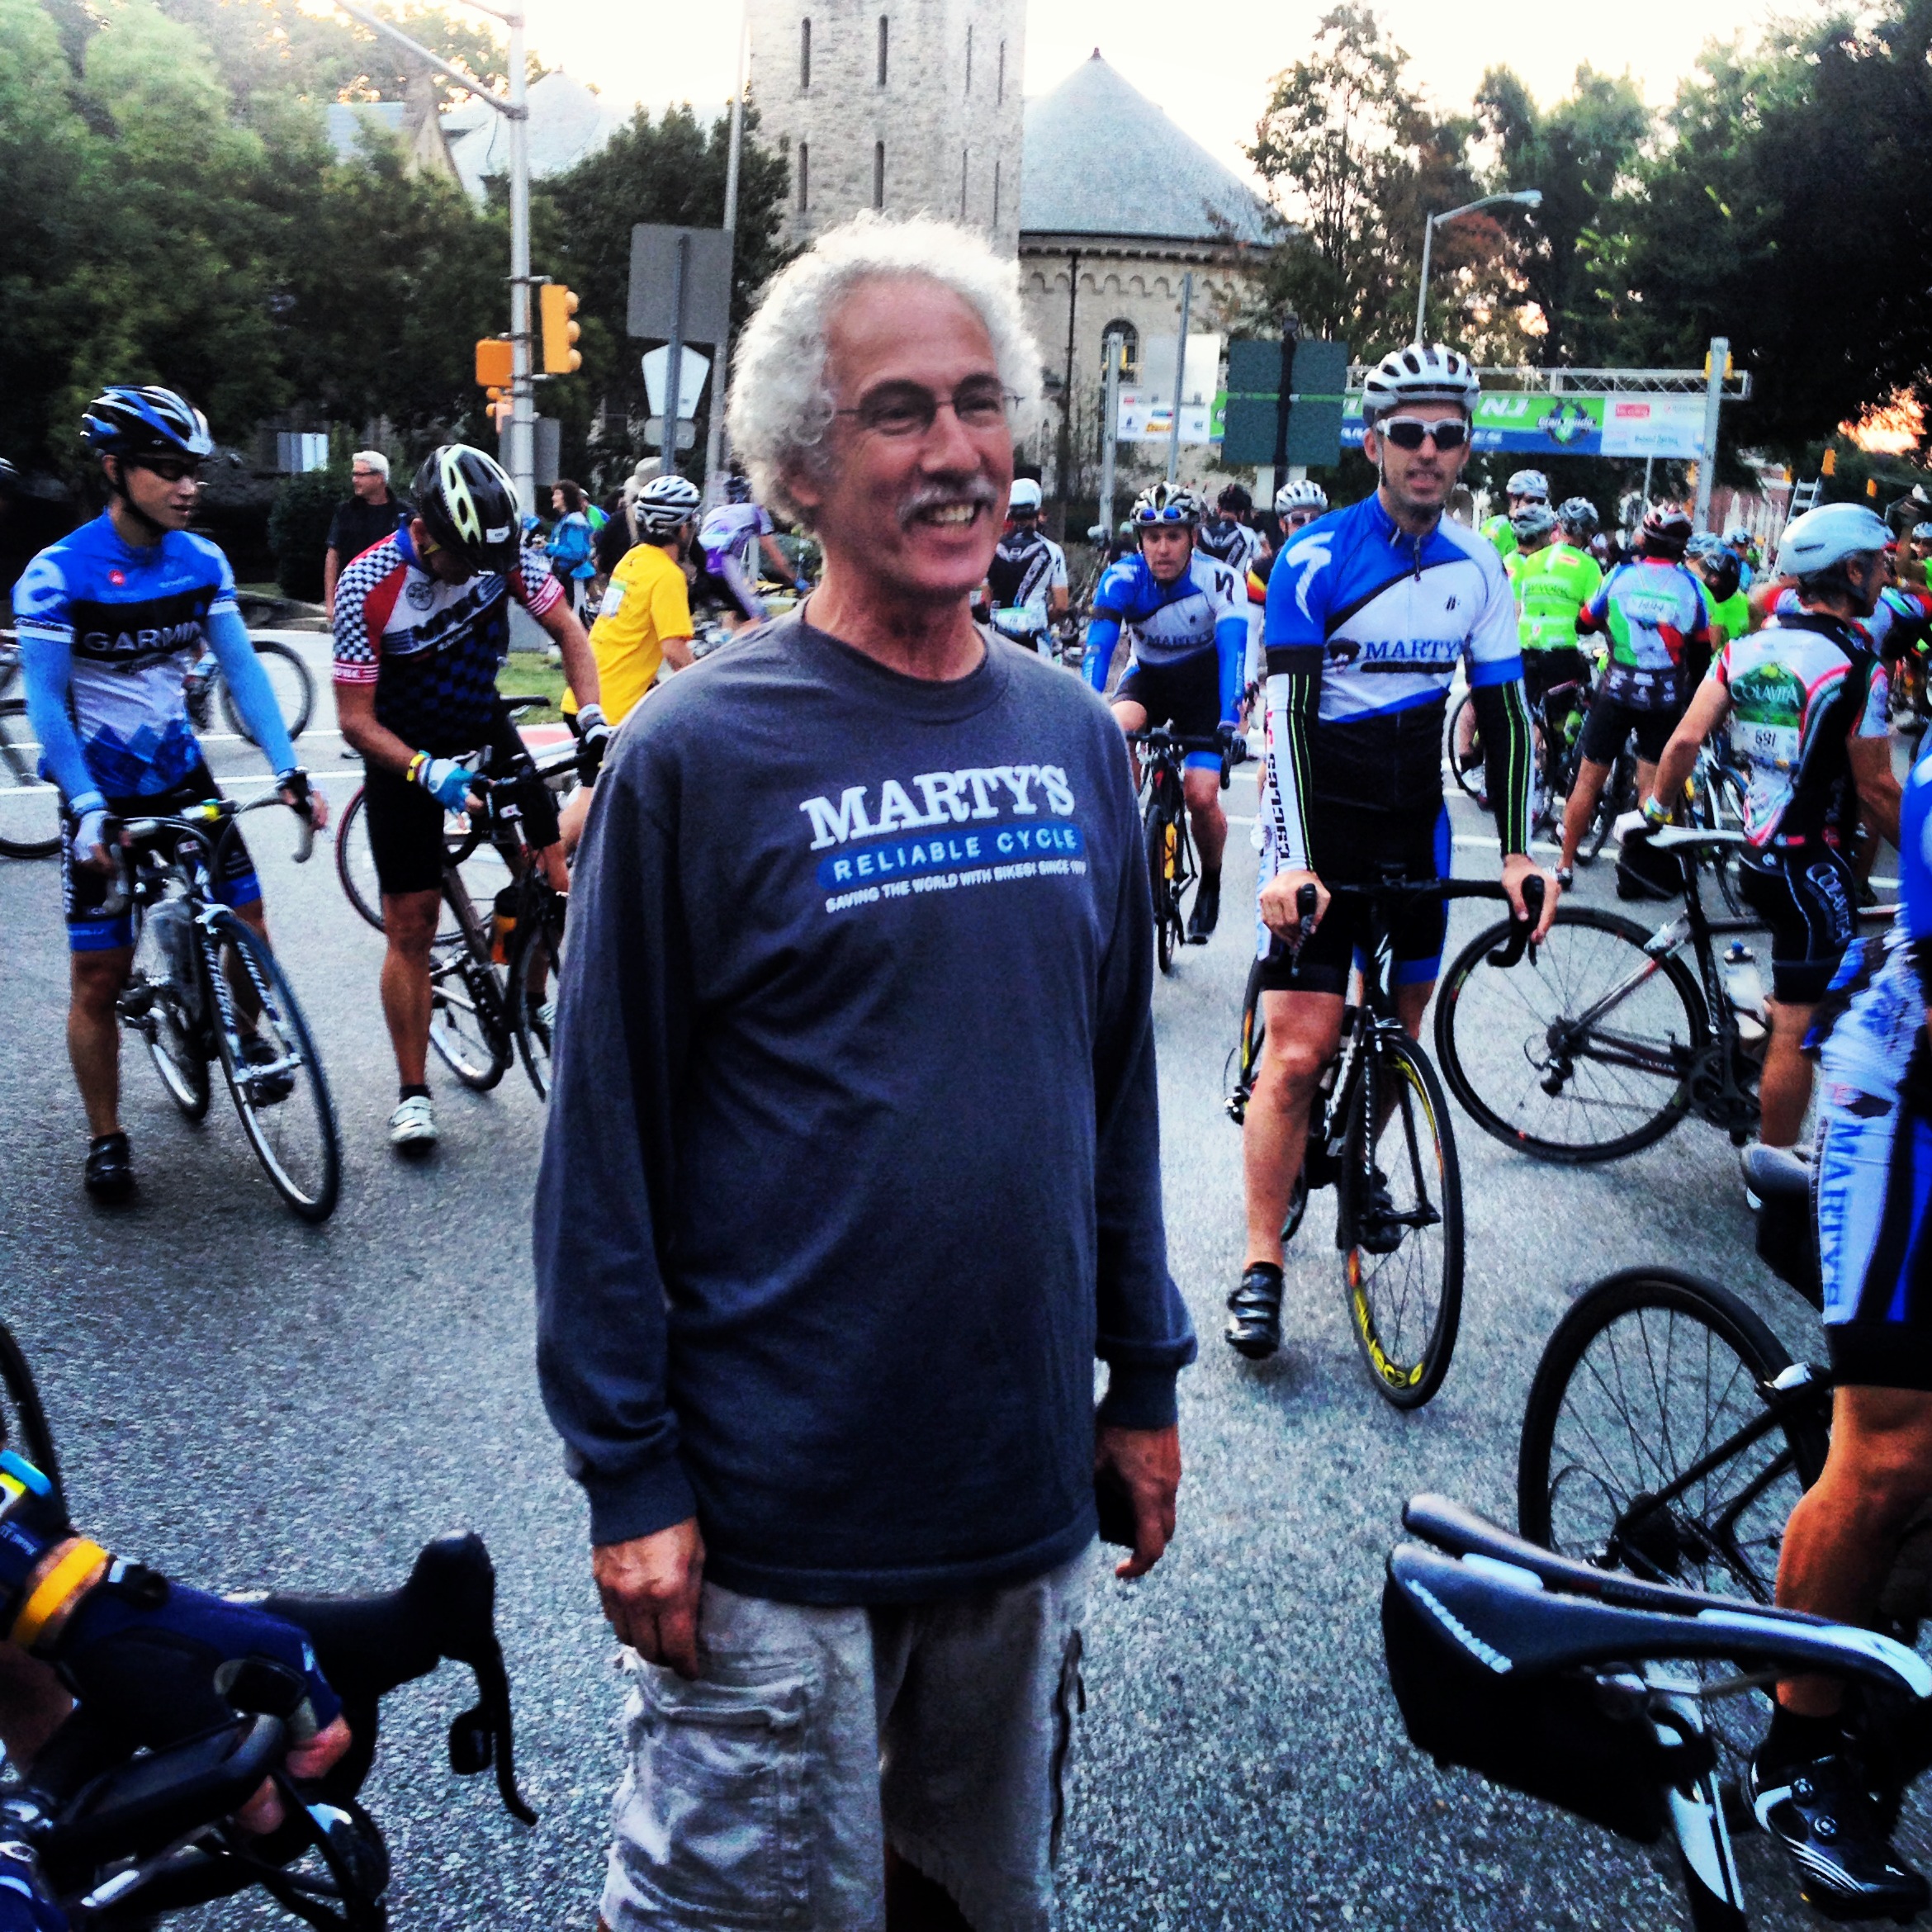 Marty giving us a pep talk before the start of the 2013 Fondo